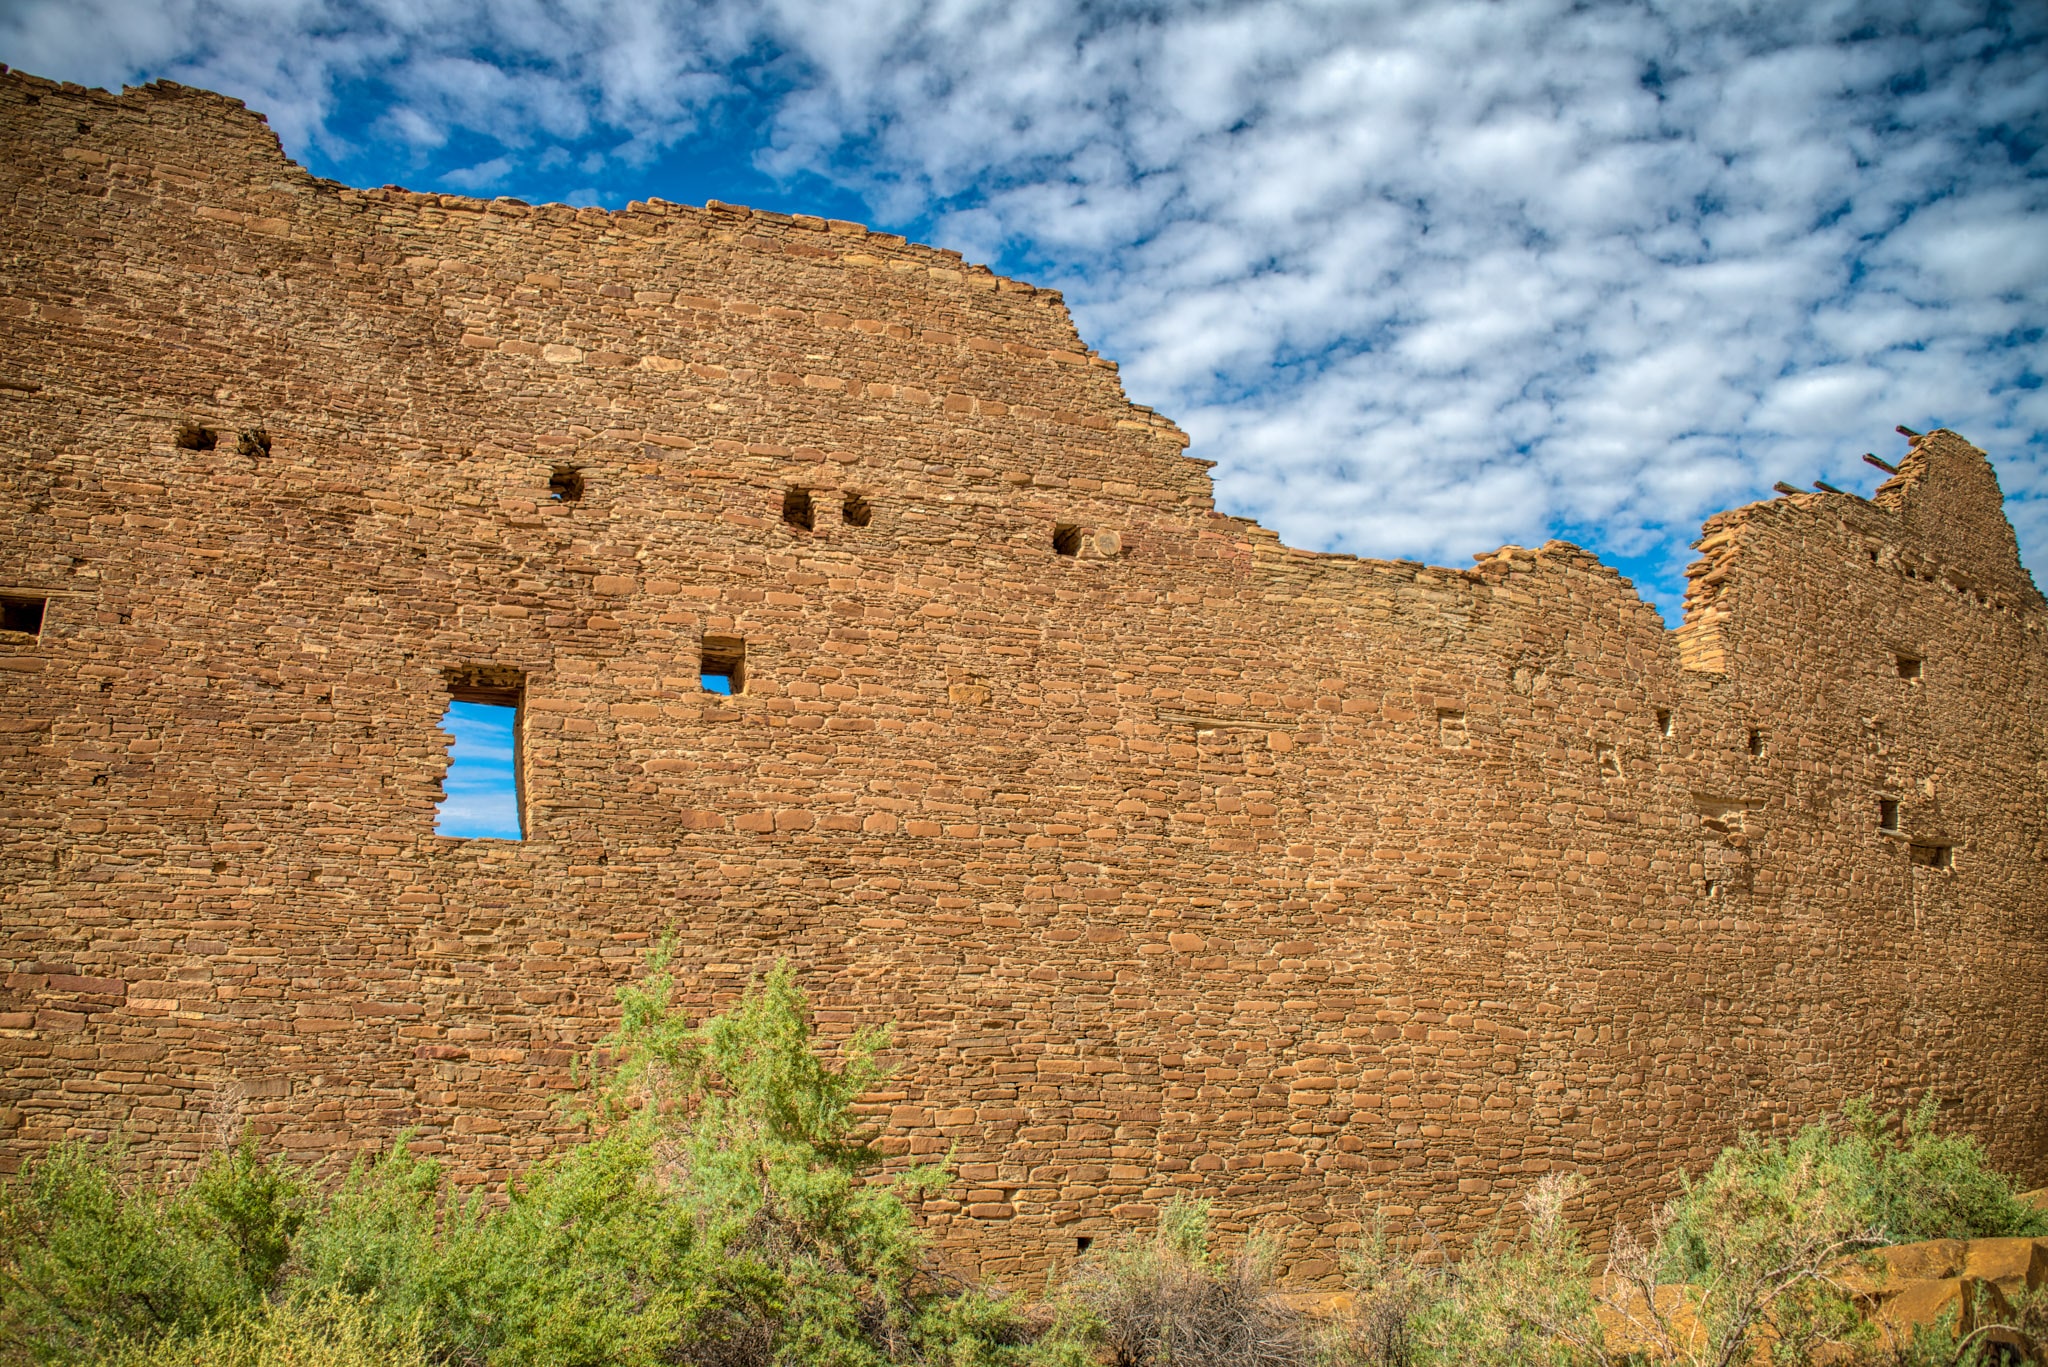 Pueblo Bonito has several masonry styles that help date the initial core ruins and later additions. This is a view of an exterior wall showing core-and-veneer stone work.